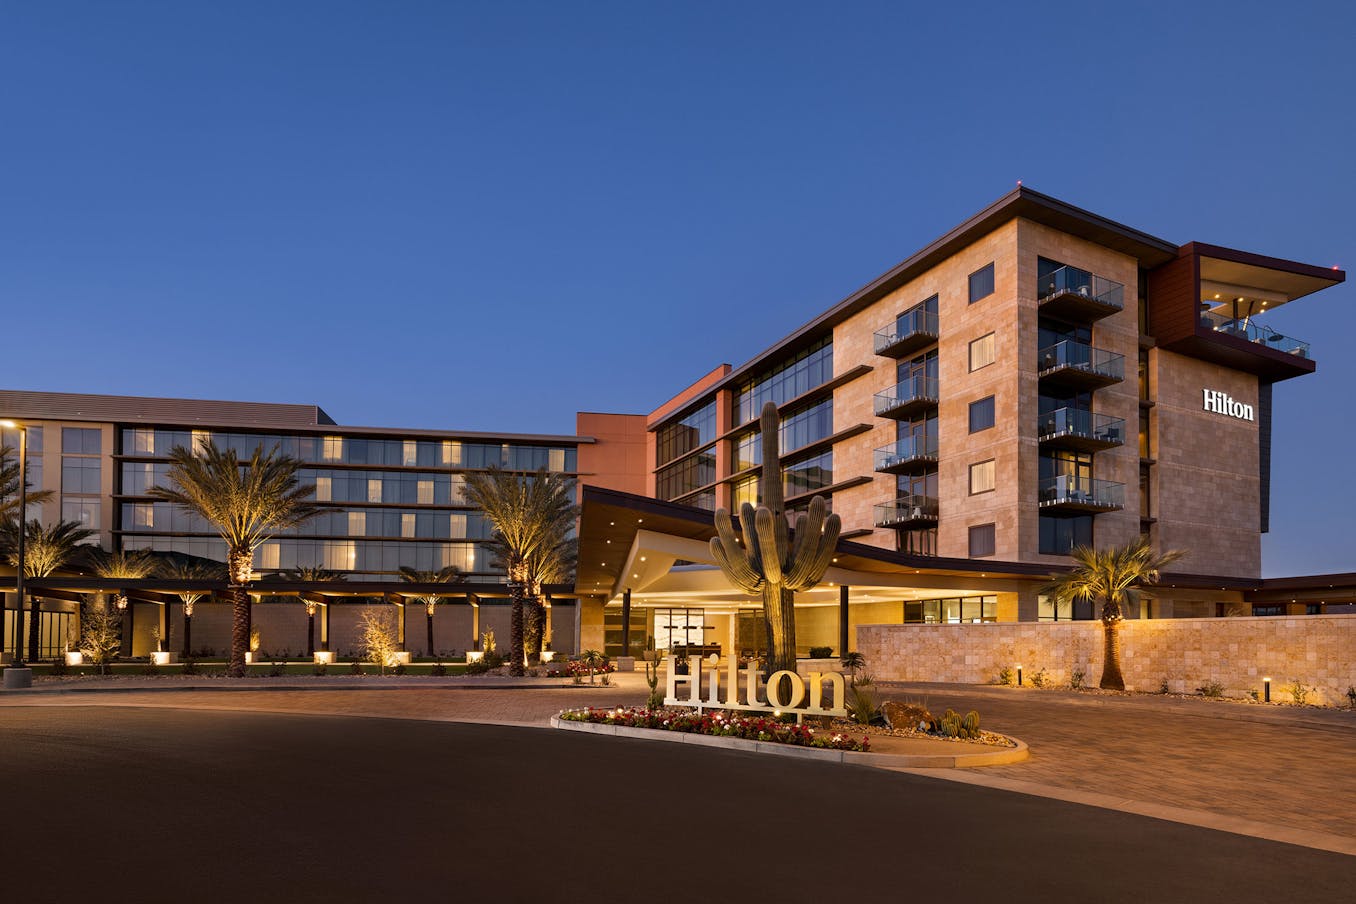 Hilton Scottdale hotel boasts elegant commercial glass walls, creating a modern and sophisticated ambiance